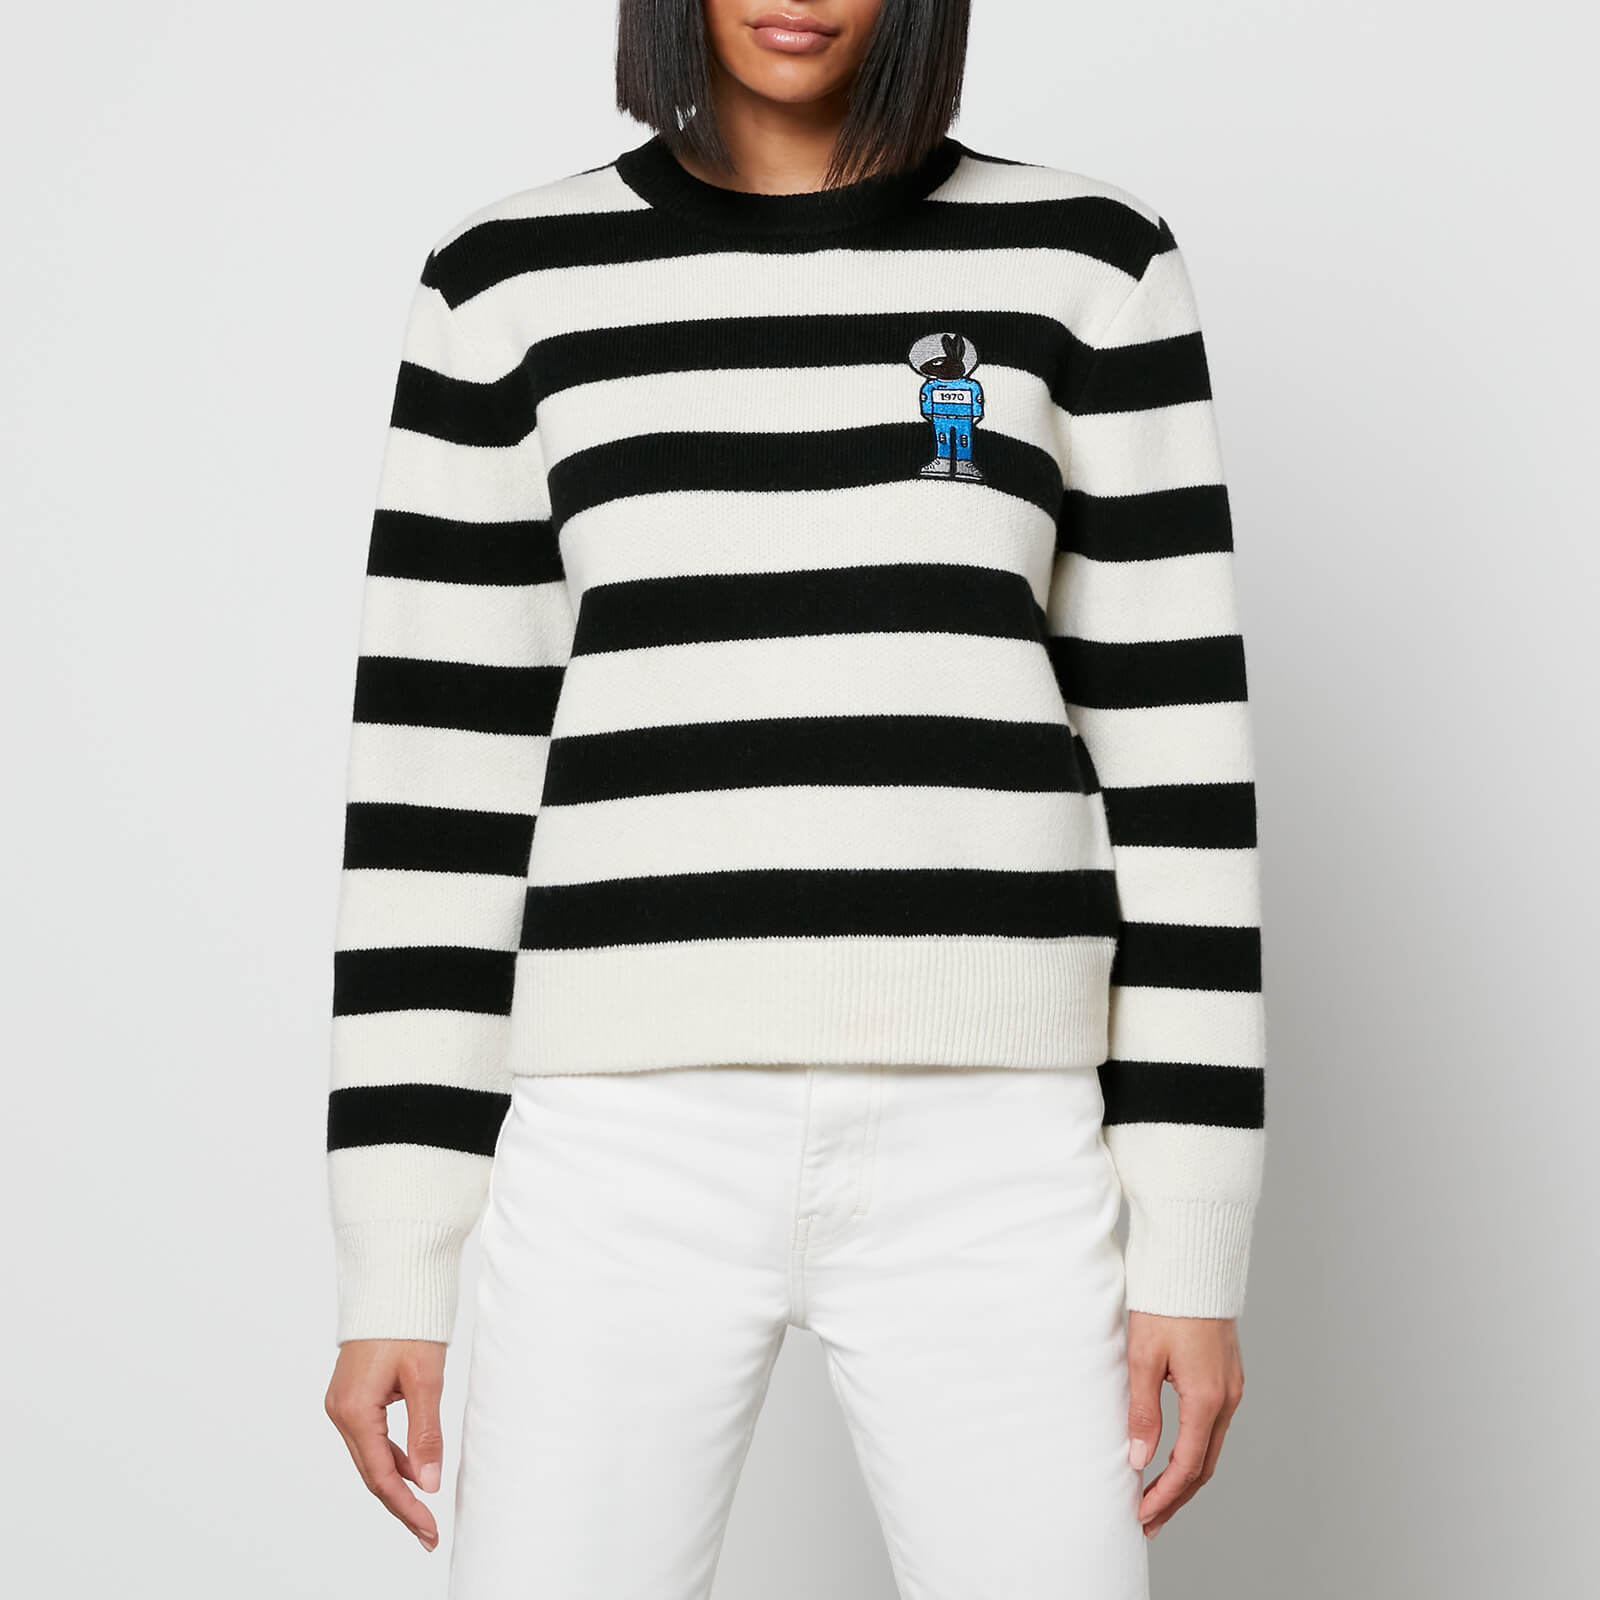 Bella Freud Women's Mythical Bunny Stripe Jumper - Ivory and Black - XS